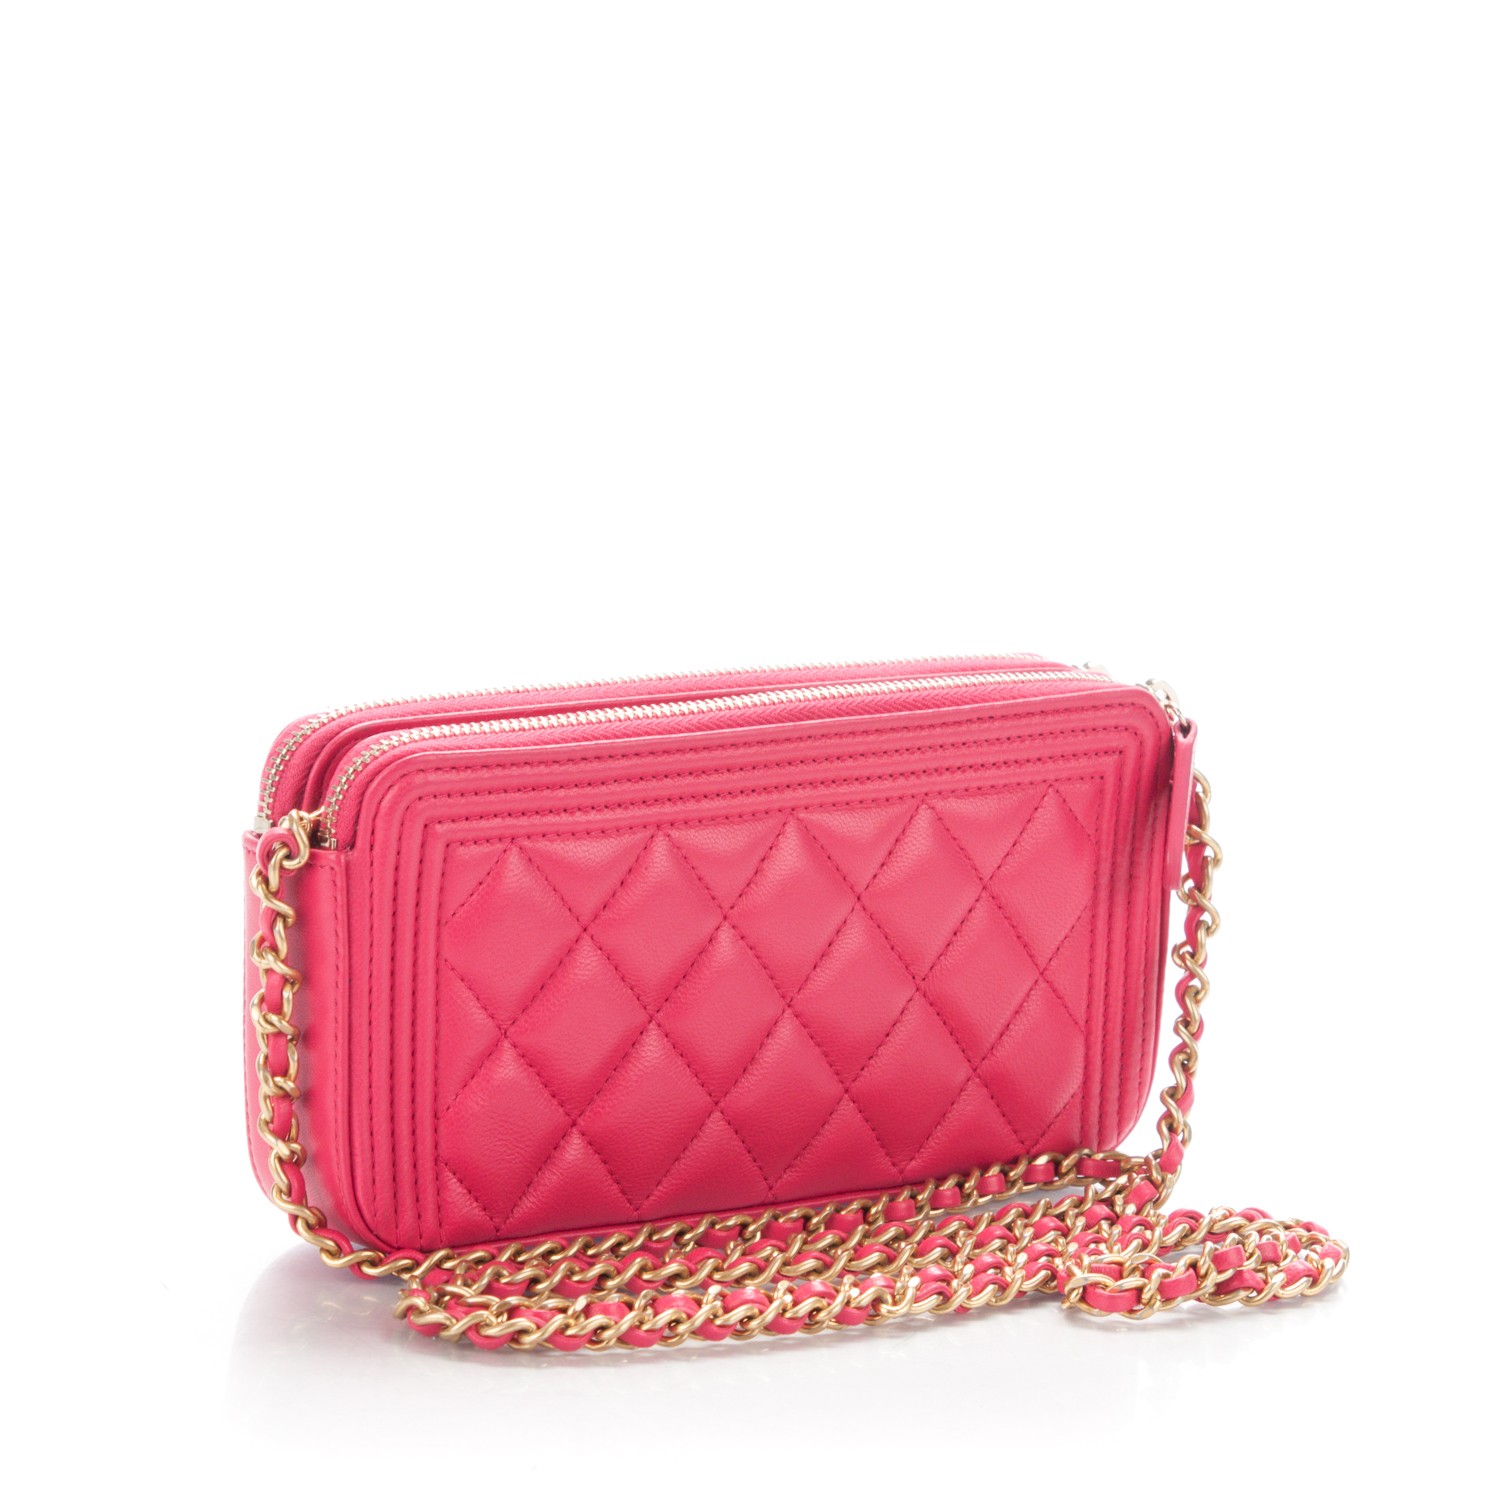 CHANEL Lambskin Quilted Small Boy Clutch With Chain Fuchsia 173180 ...